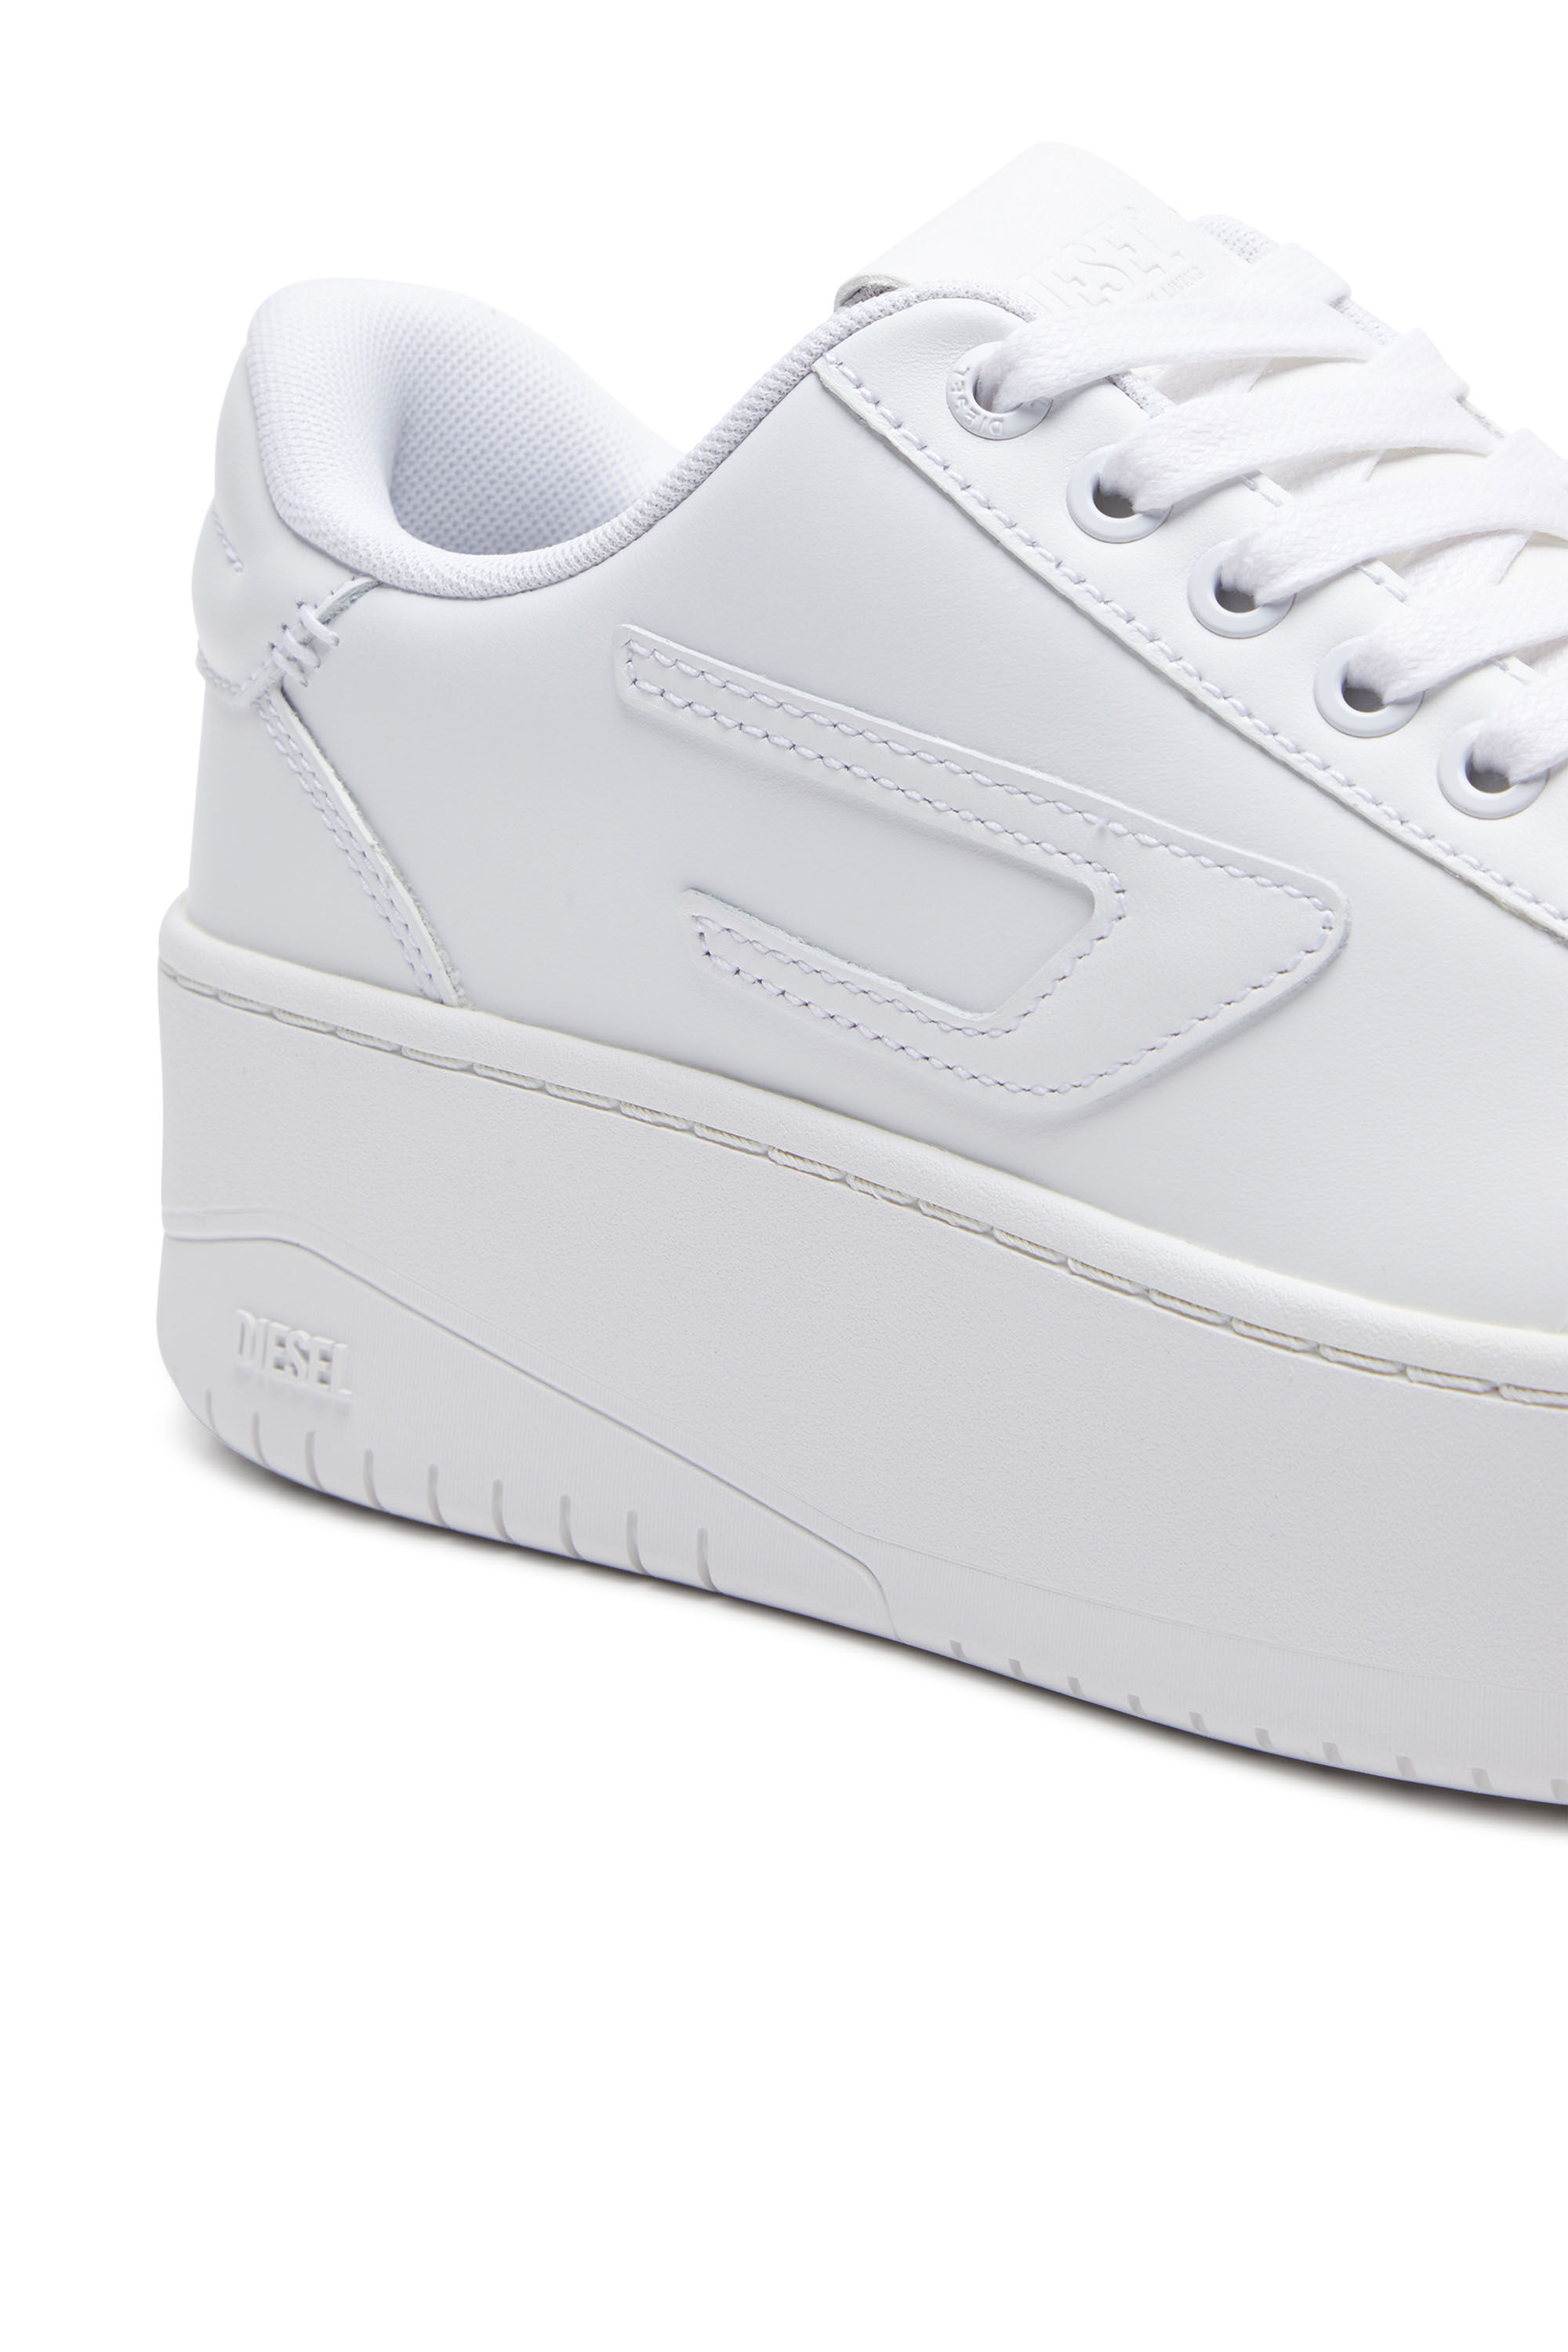 Diesel - S-ATHENE BOLD X, Woman S-Athene Bold-Flatform sneakers in leather in White - Image 6